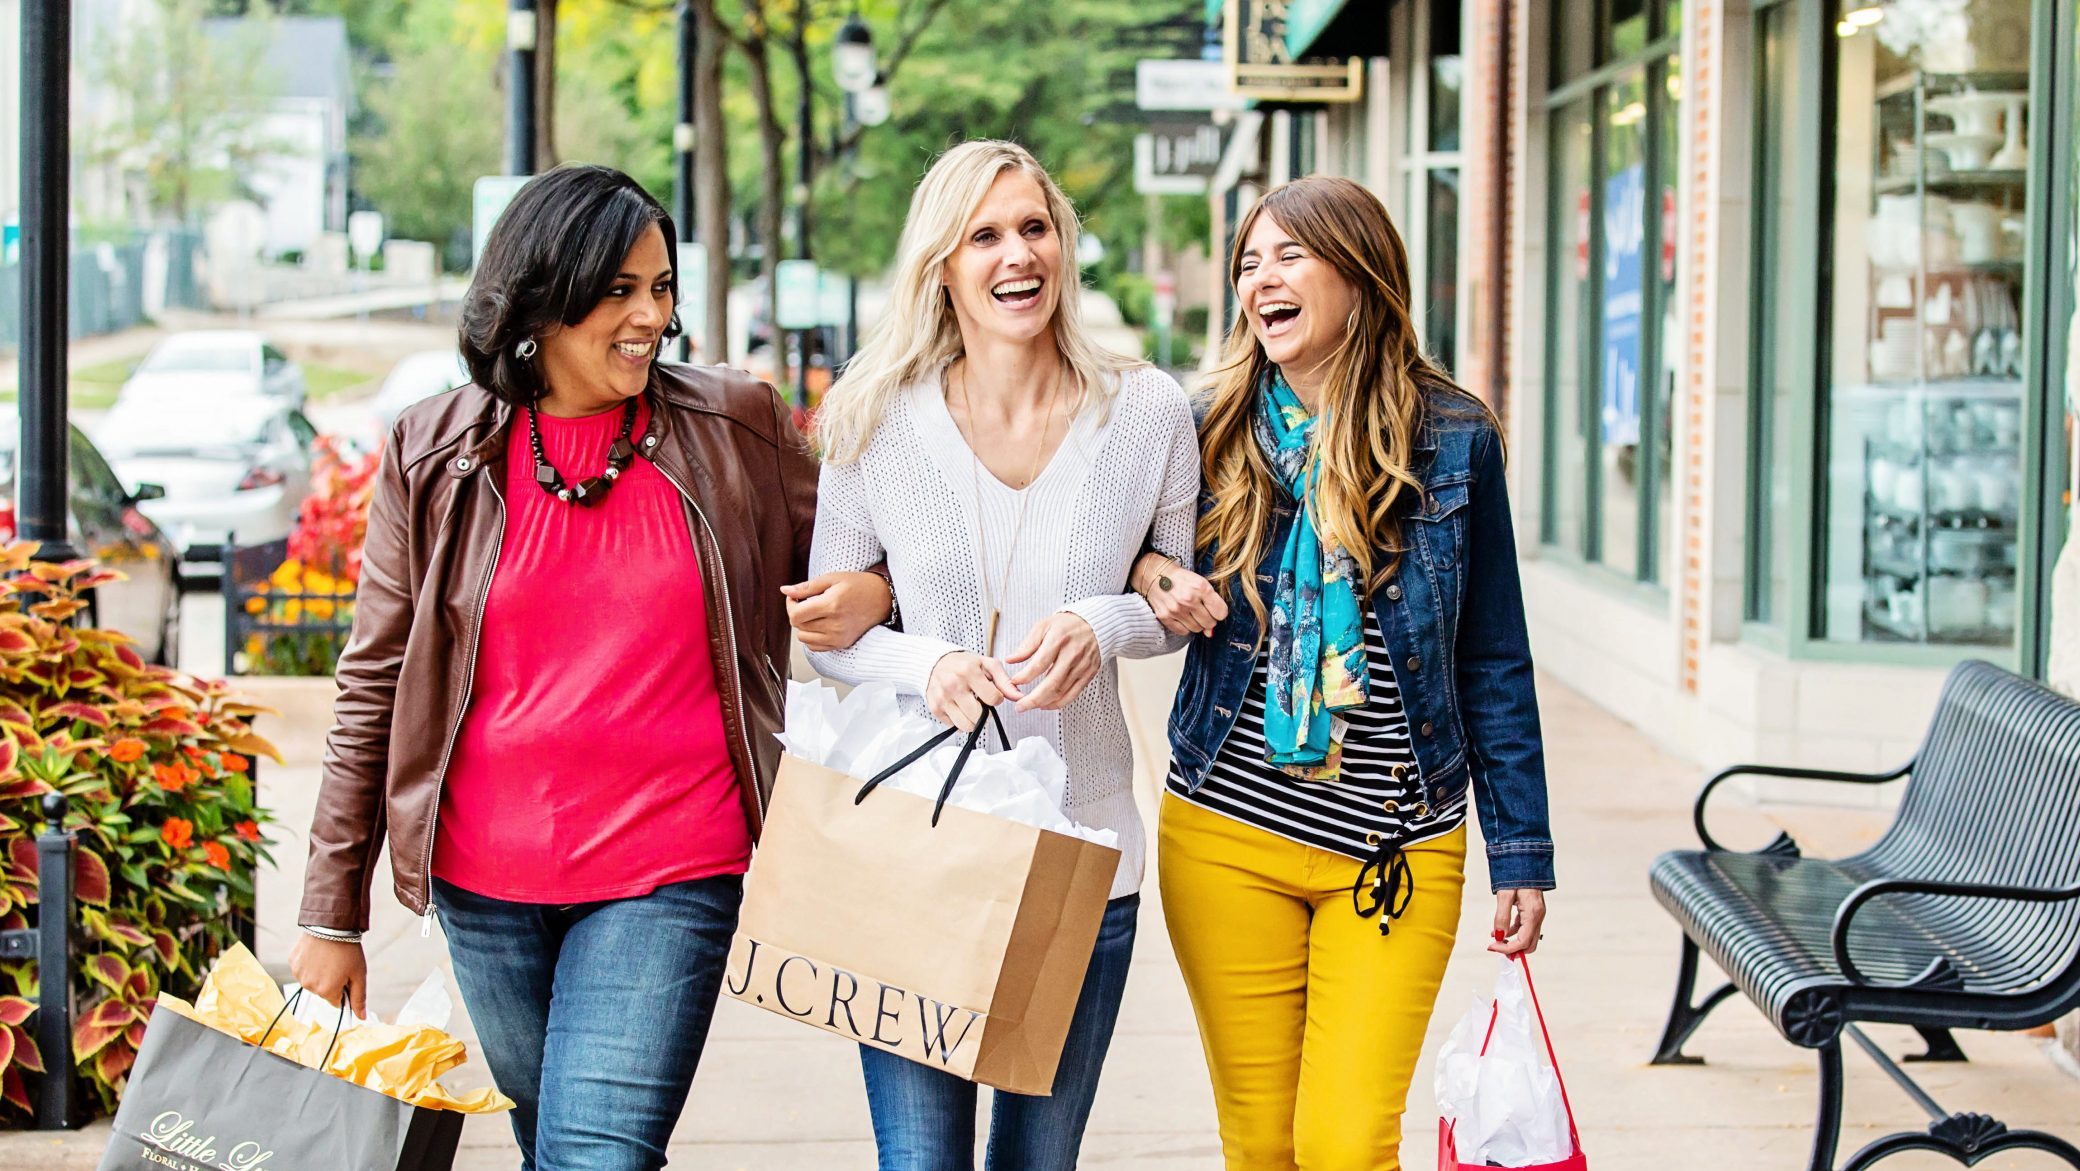 Is Shopping a Form of Exercise?